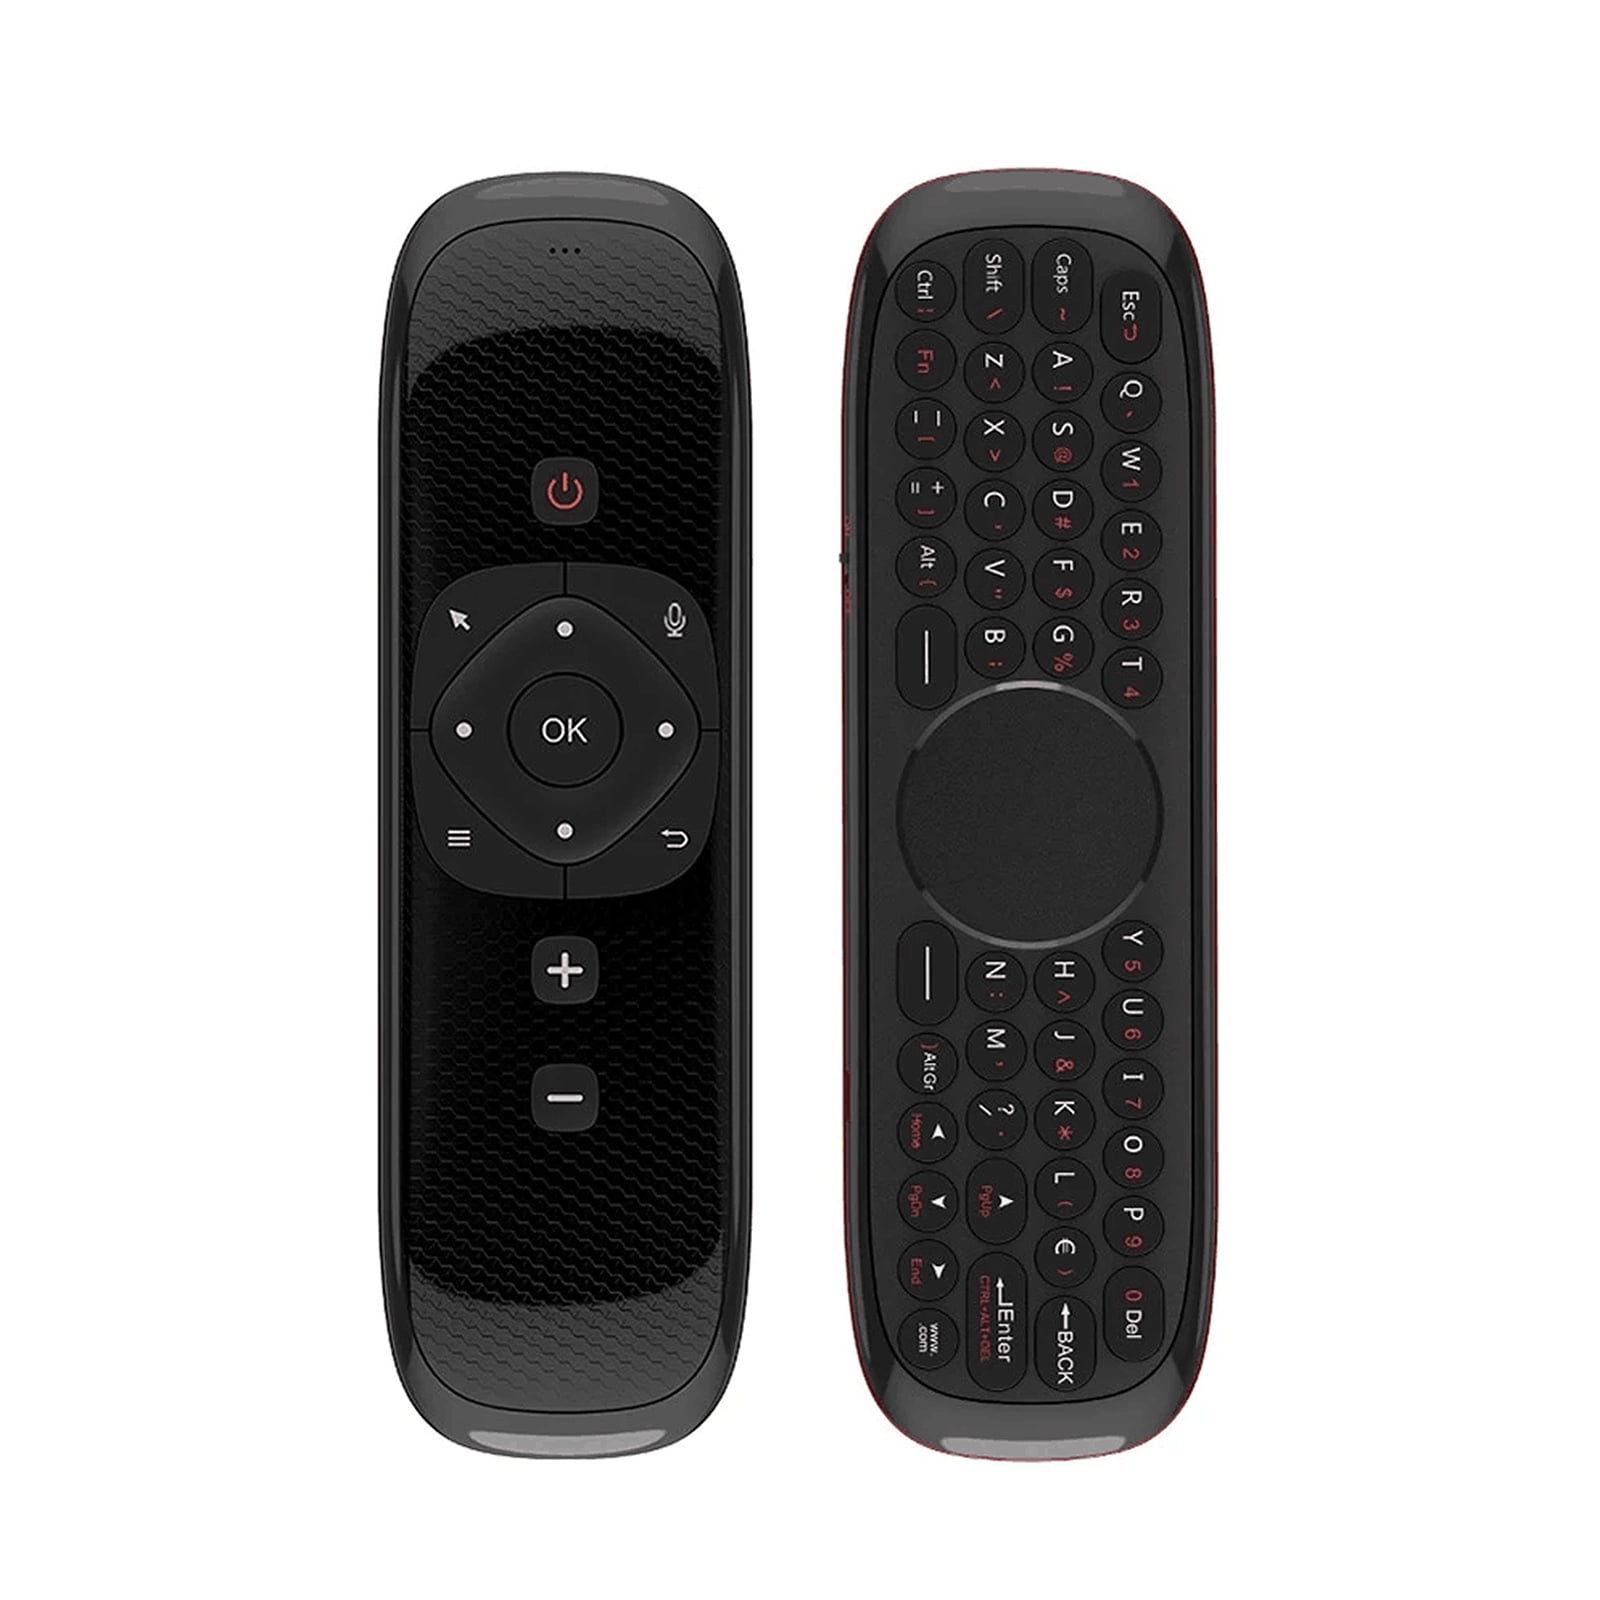 Wechip W2 2.4G Wirefree Keyboard with Touchpad Mouse Infrared 